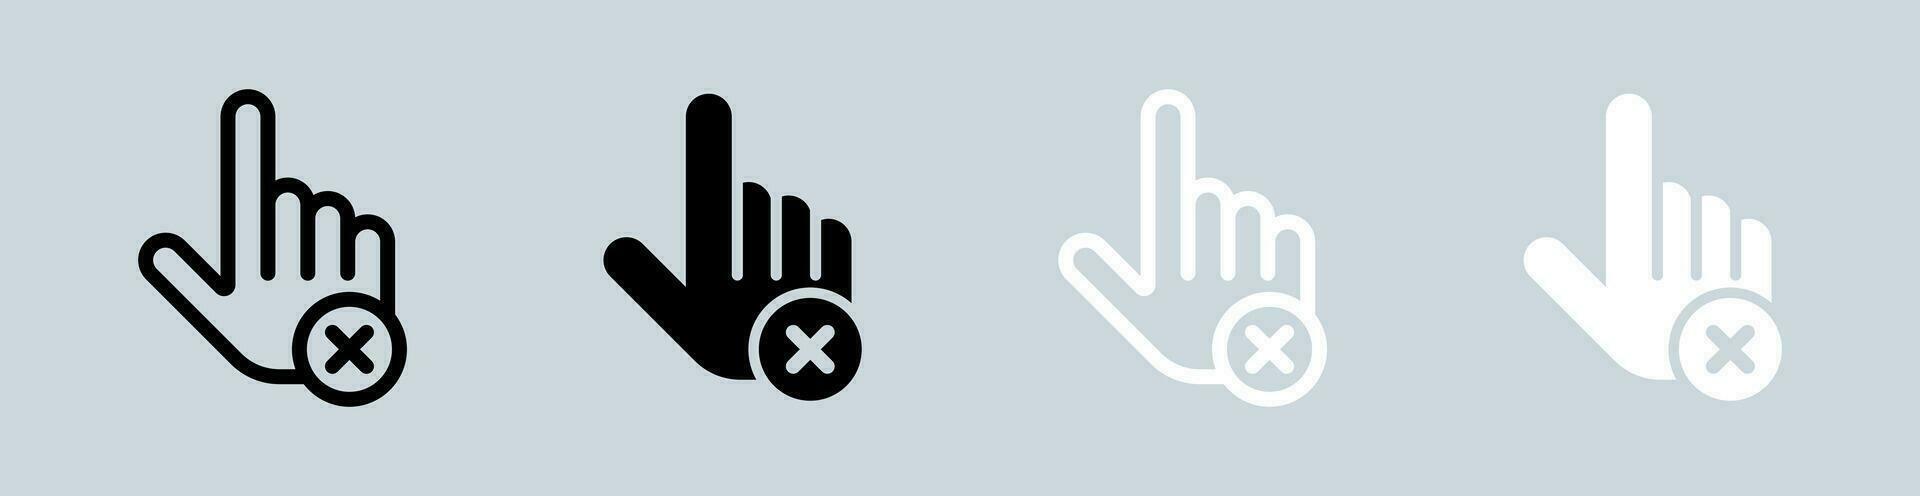 Do not touch icon set in black and white. Stop signs vector illustration